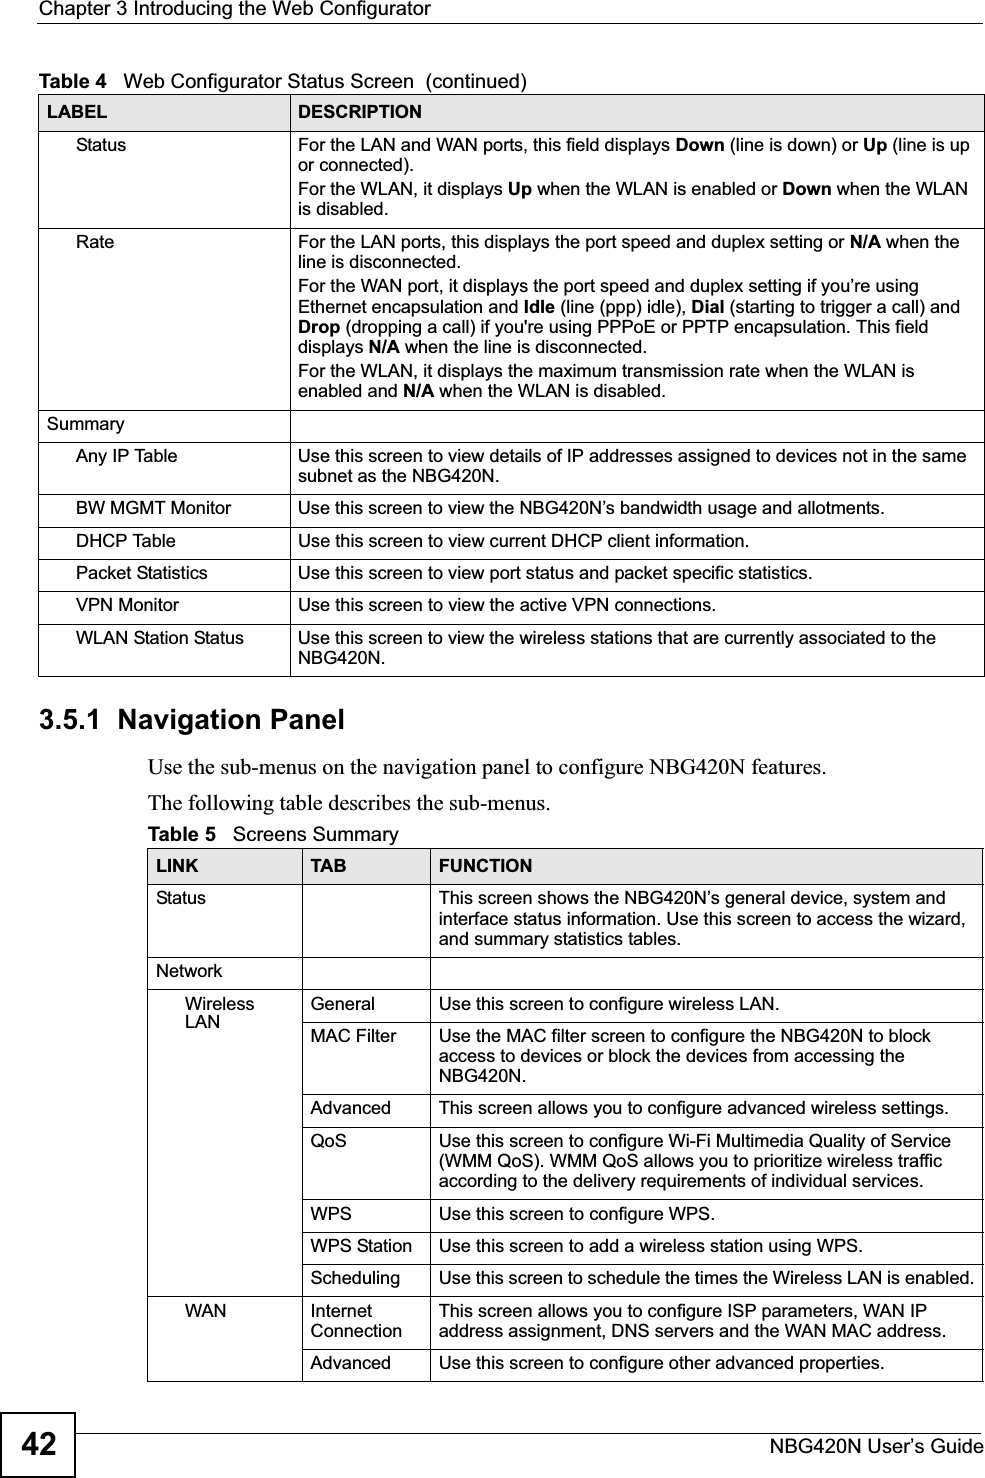 Chapter 3 Introducing the Web ConfiguratorNBG420N User’s Guide423.5.1  Navigation PanelUse the sub-menus on the navigation panel to configure NBG420N features. The following table describes the sub-menus.Status For the LAN and WAN ports, this field displays Down (line is down) or Up (line is up or connected).For the WLAN, it displays Up when the WLAN is enabled or Down when the WLAN is disabled.Rate For the LAN ports, this displays the port speed and duplex setting or N/A when the line is disconnected.For the WAN port, it displays the port speed and duplex setting if you’re using Ethernet encapsulation and Idle (line (ppp) idle), Dial (starting to trigger a call) and Drop (dropping a call) if you&apos;re using PPPoE or PPTP encapsulation. This field displays N/A when the line is disconnected.For the WLAN, it displays the maximum transmission rate when the WLAN is enabled and N/A when the WLAN is disabled.SummaryAny IP Table Use this screen to view details of IP addresses assigned to devices not in the same subnet as the NBG420N.BW MGMT Monitor Use this screen to view the NBG420N’s bandwidth usage and allotments.DHCP Table Use this screen to view current DHCP client information.Packet Statistics Use this screen to view port status and packet specific statistics.VPN Monitor Use this screen to view the active VPN connections.WLAN Station Status Use this screen to view the wireless stations that are currently associated to the NBG420N.Table 4   Web Configurator Status Screen  (continued) LABEL DESCRIPTIONTable 5   Screens SummaryLINK TAB FUNCTIONStatus This screen shows the NBG420N’s general device, system and interface status information. Use this screen to access the wizard, and summary statistics tables.NetworkWirelessLANGeneral Use this screen to configure wireless LAN.MAC Filter Use the MAC filter screen to configure the NBG420N to block access to devices or block the devices from accessing the NBG420N.Advanced This screen allows you to configure advanced wireless settings.QoS Use this screen to configure Wi-Fi Multimedia Quality of Service (WMM QoS). WMM QoS allows you to prioritize wireless traffic according to the delivery requirements of individual services.WPS Use this screen to configure WPS.WPS Station Use this screen to add a wireless station using WPS.Scheduling Use this screen to schedule the times the Wireless LAN is enabled.WAN Internet ConnectionThis screen allows you to configure ISP parameters, WAN IP address assignment, DNS servers and the WAN MAC address. Advanced Use this screen to configure other advanced properties.